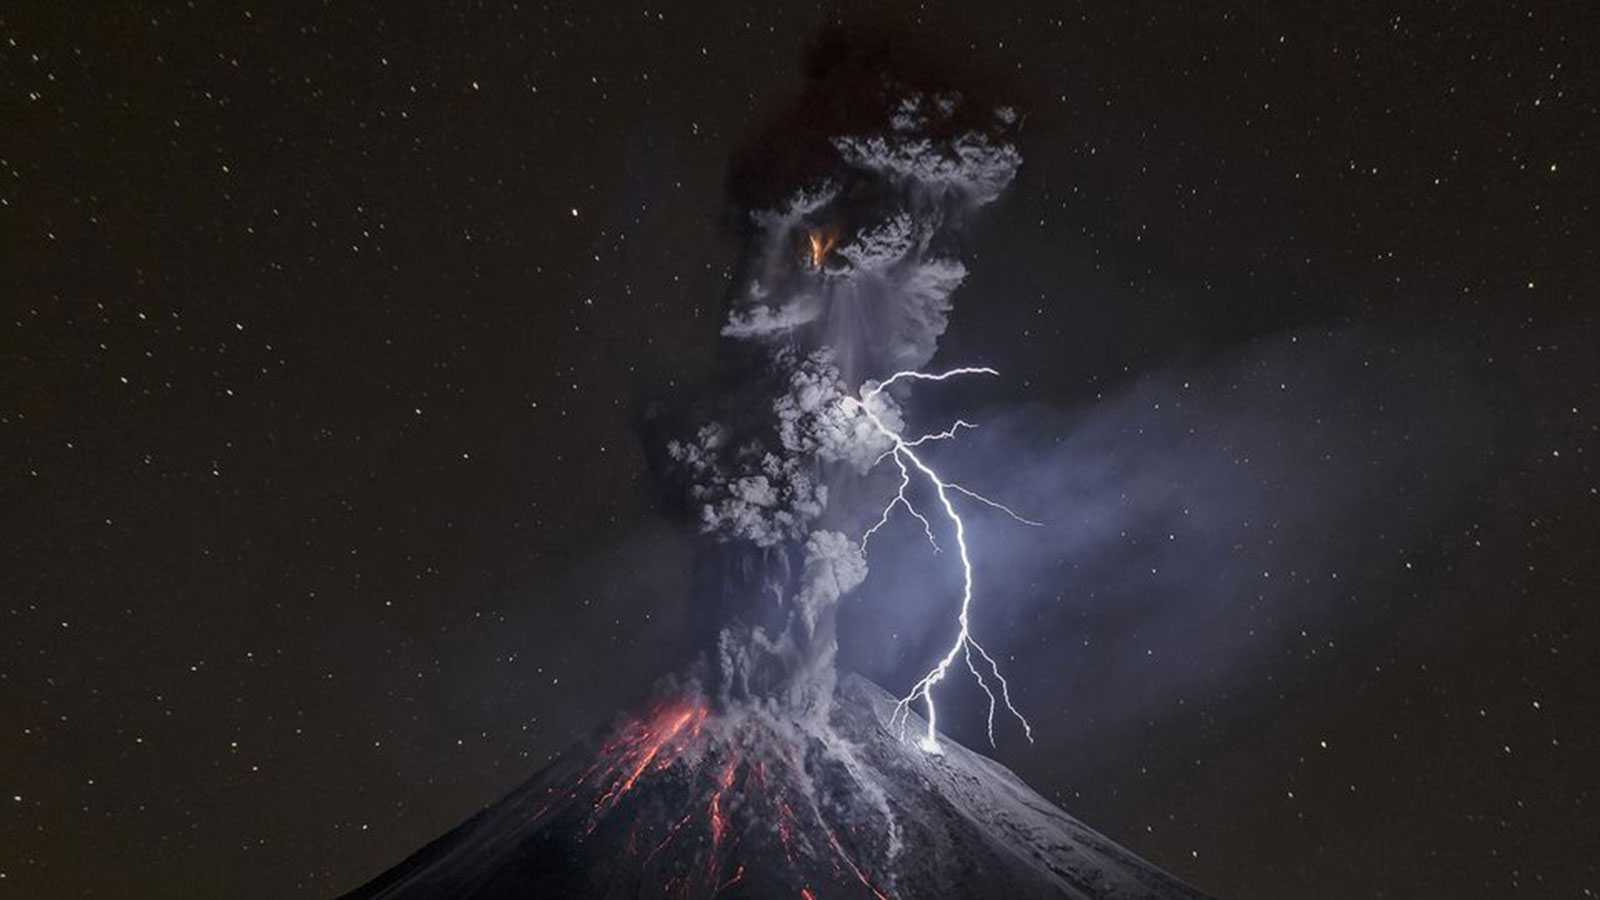 National Georgraphic's Photo Of The Year. The Power Of Nature By Sergio Tapiro Velasco